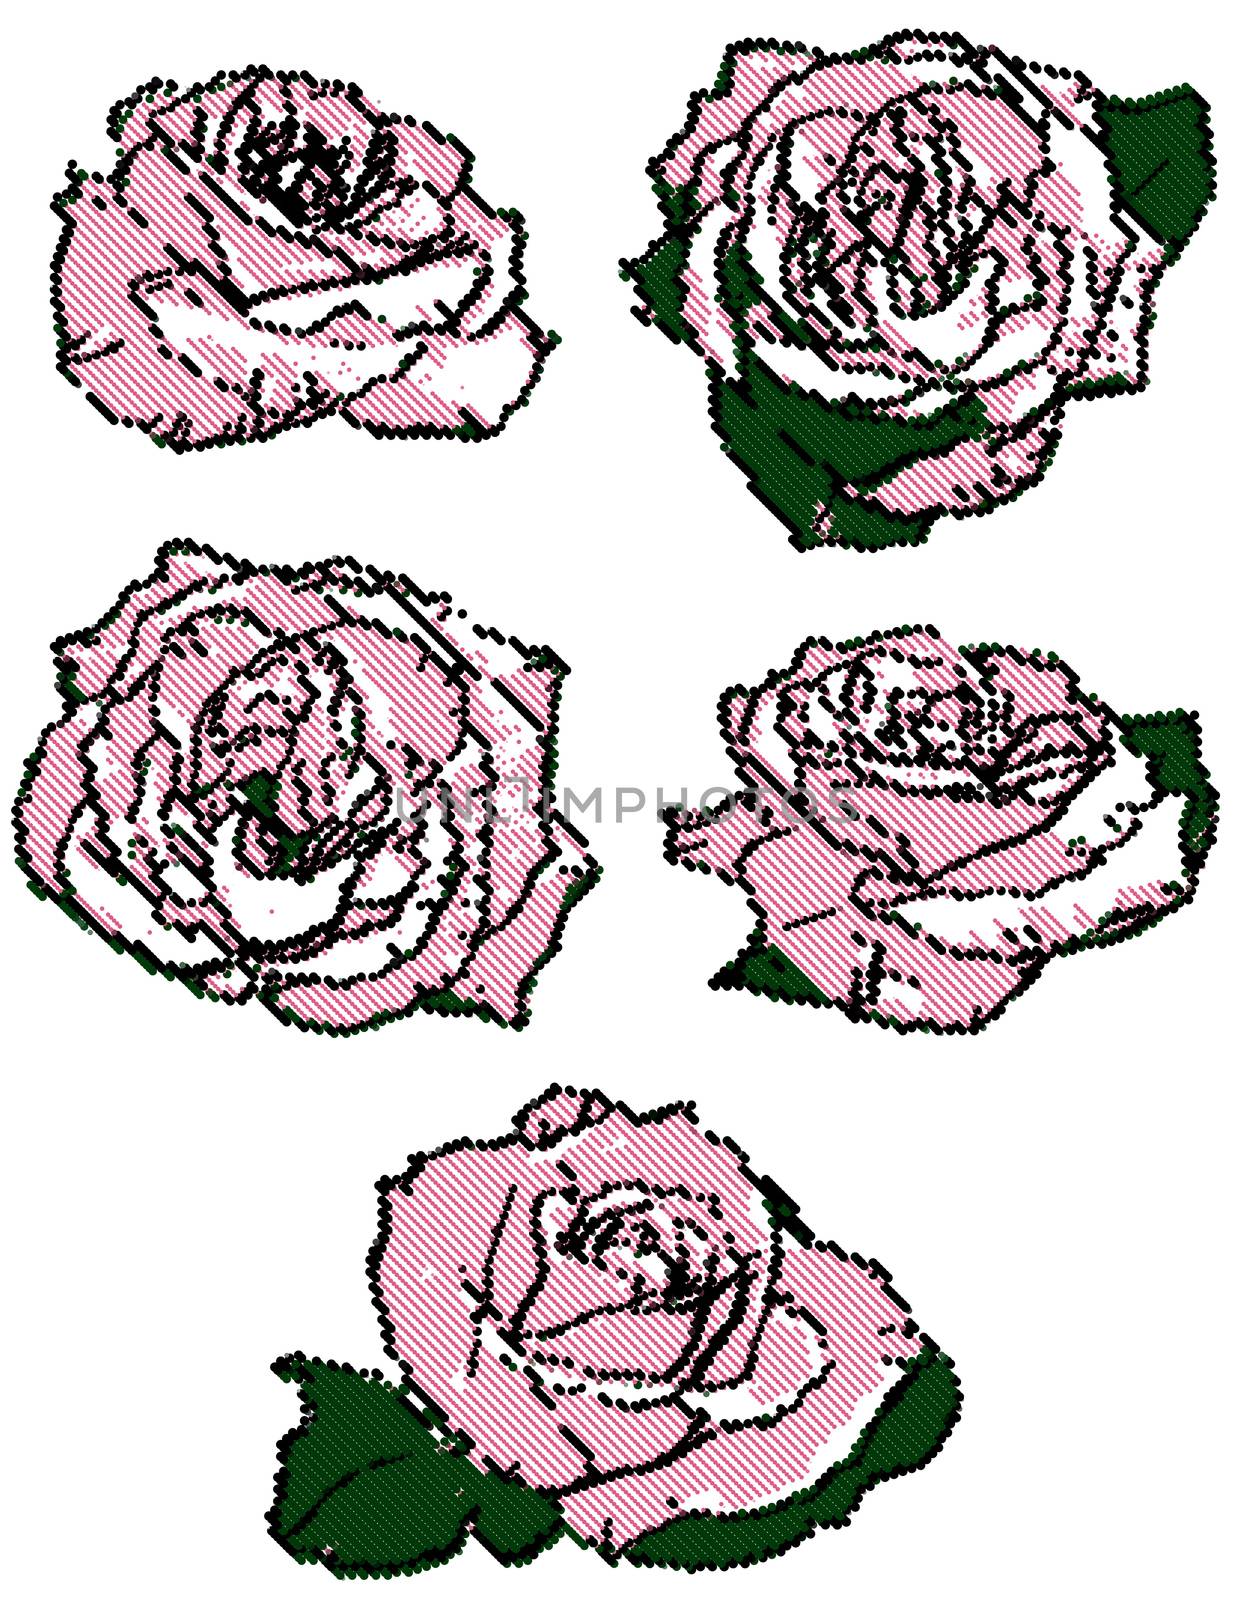 black and pink halftone points roses set